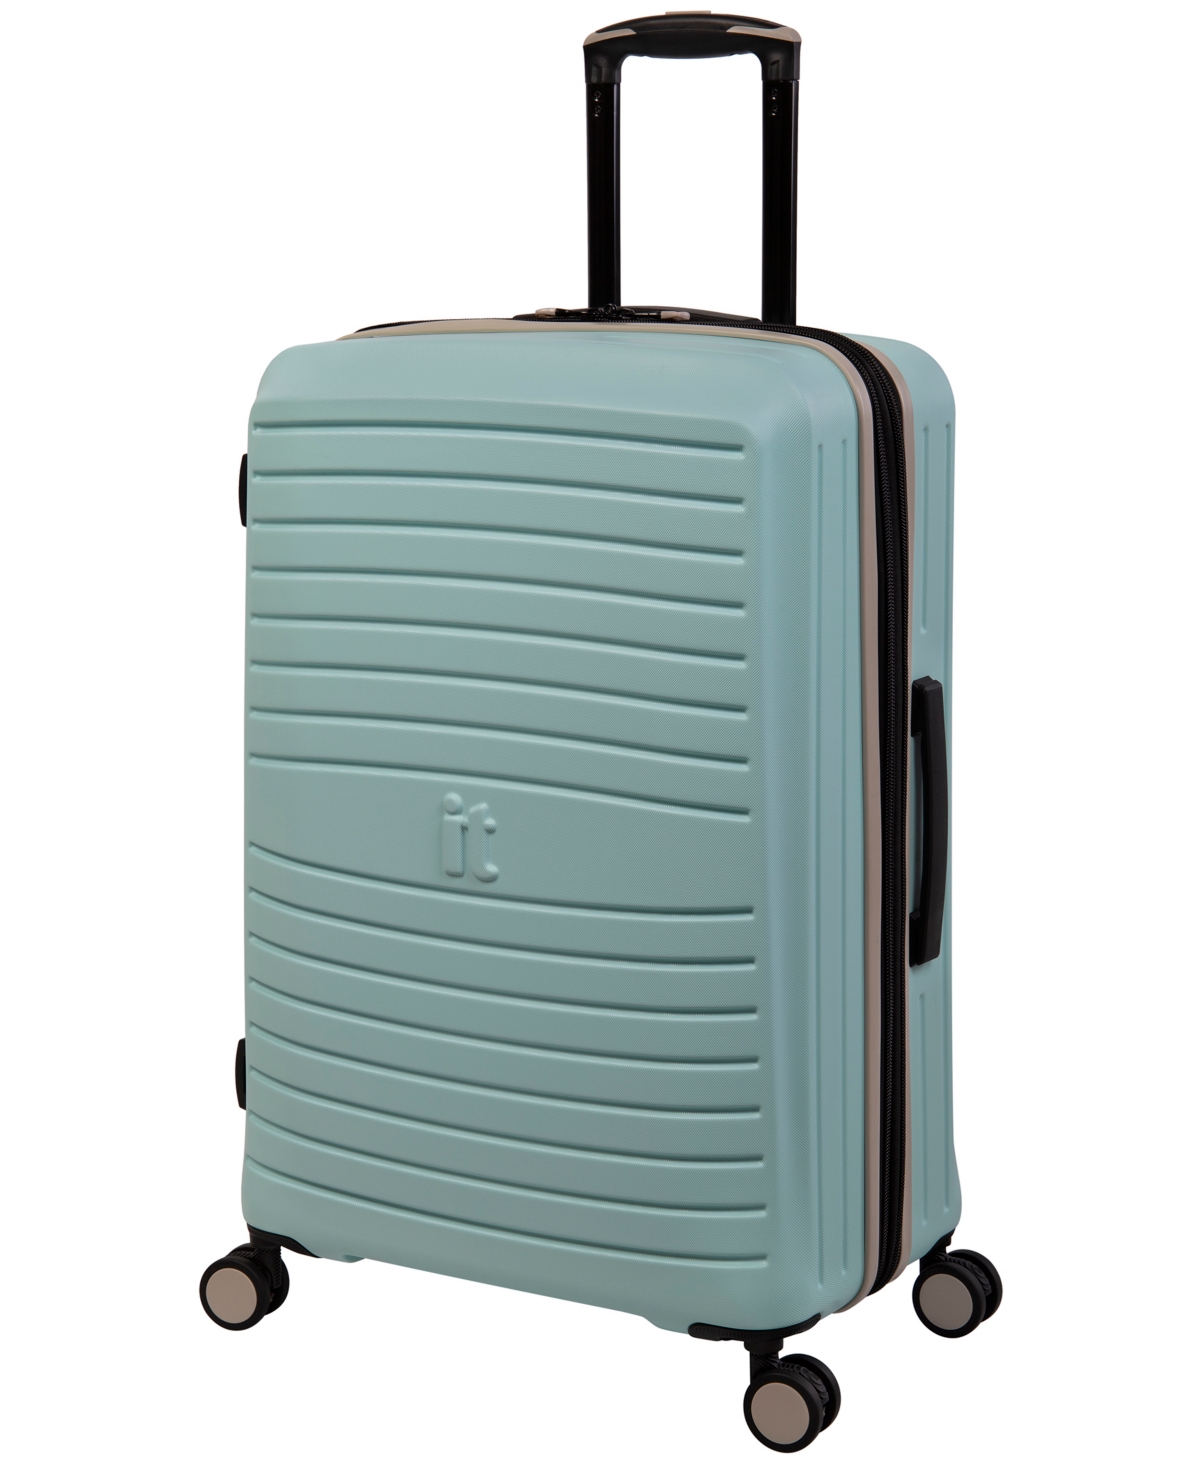 It Luggage 25" Hardside 8-wheel Expandable Spinner Luggage In Mint Eggshell